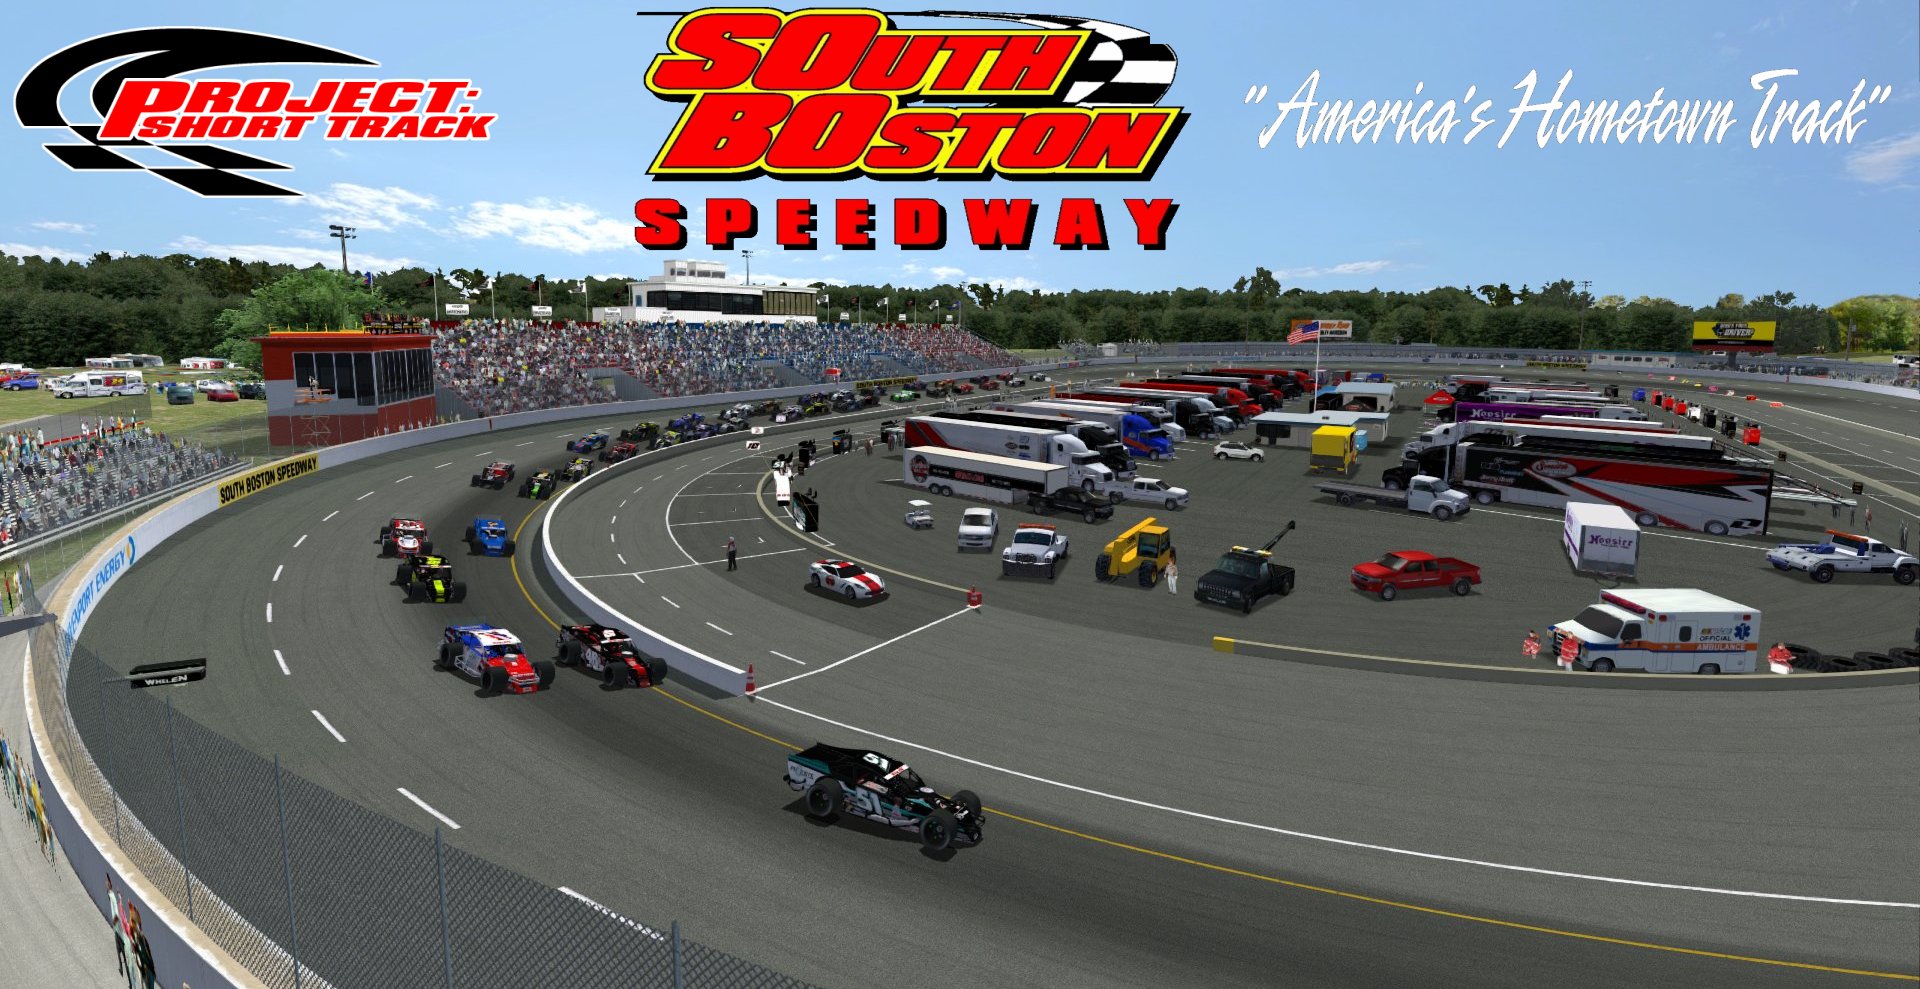 NR2k3tracks :: PROJECT: Short Track :: SOUTH BOSTON SPEEDWAY - "America's Hometown Track